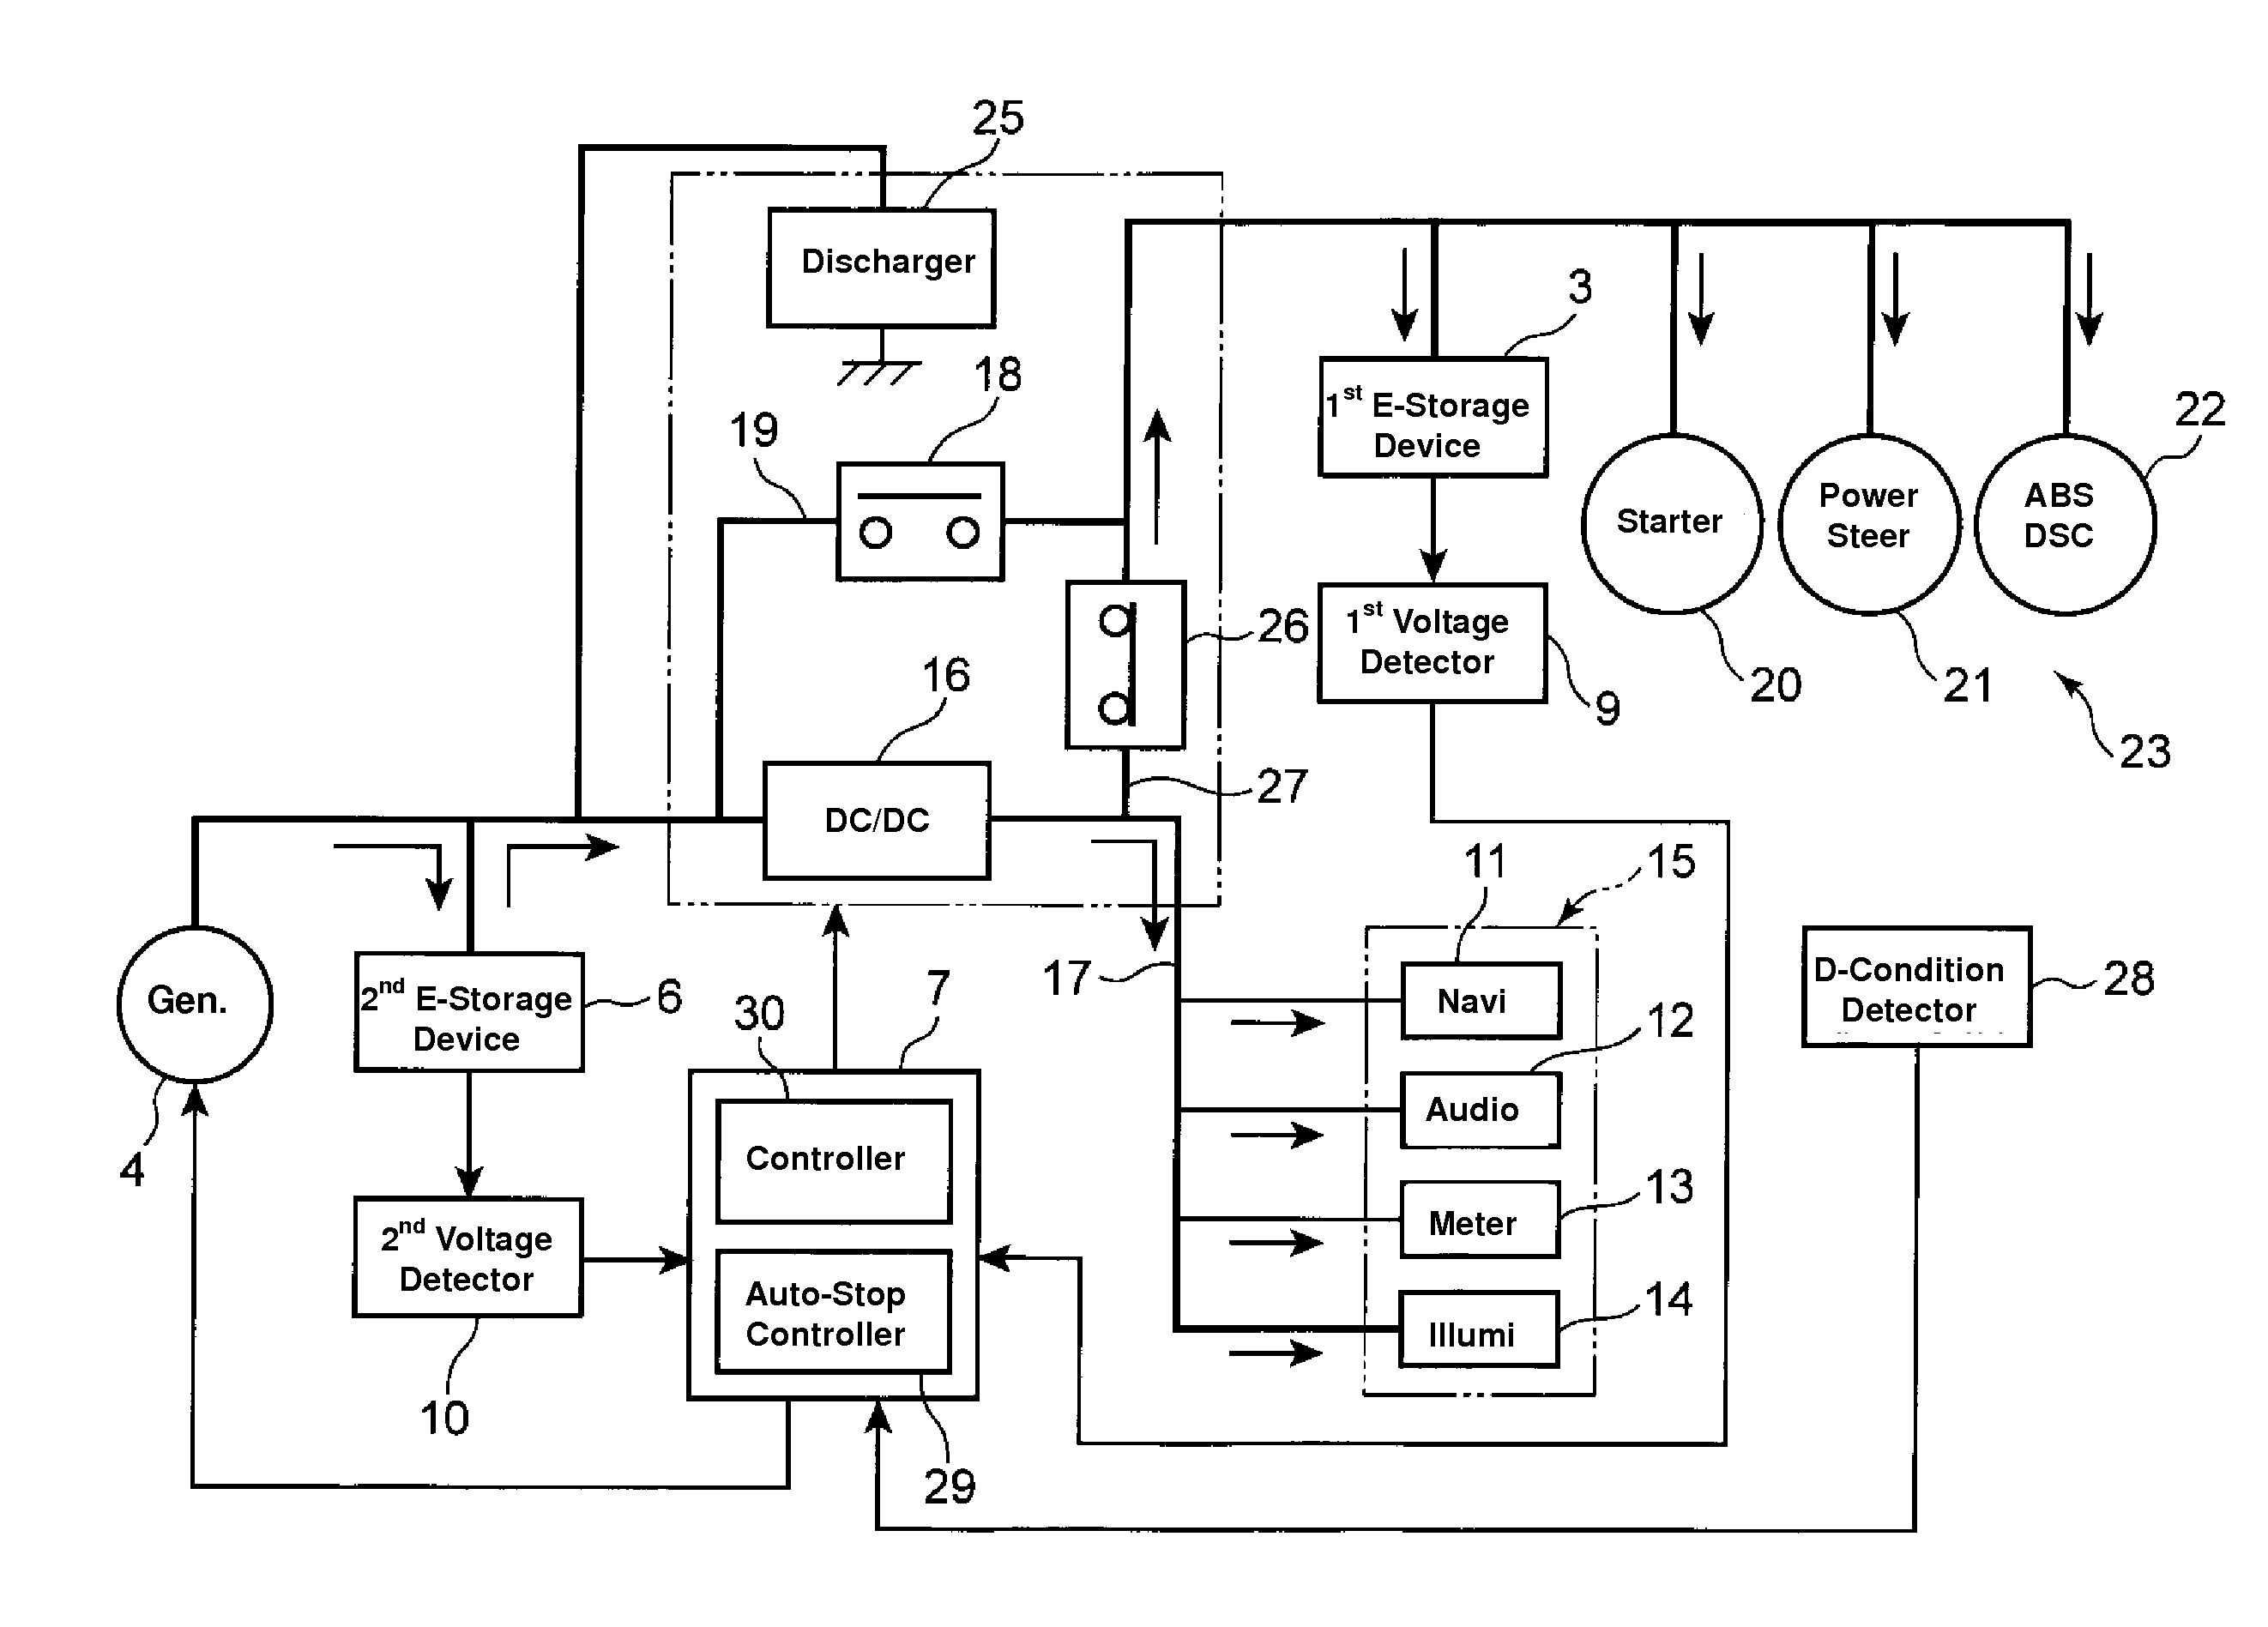 Power-supply control apparatus of vehicle